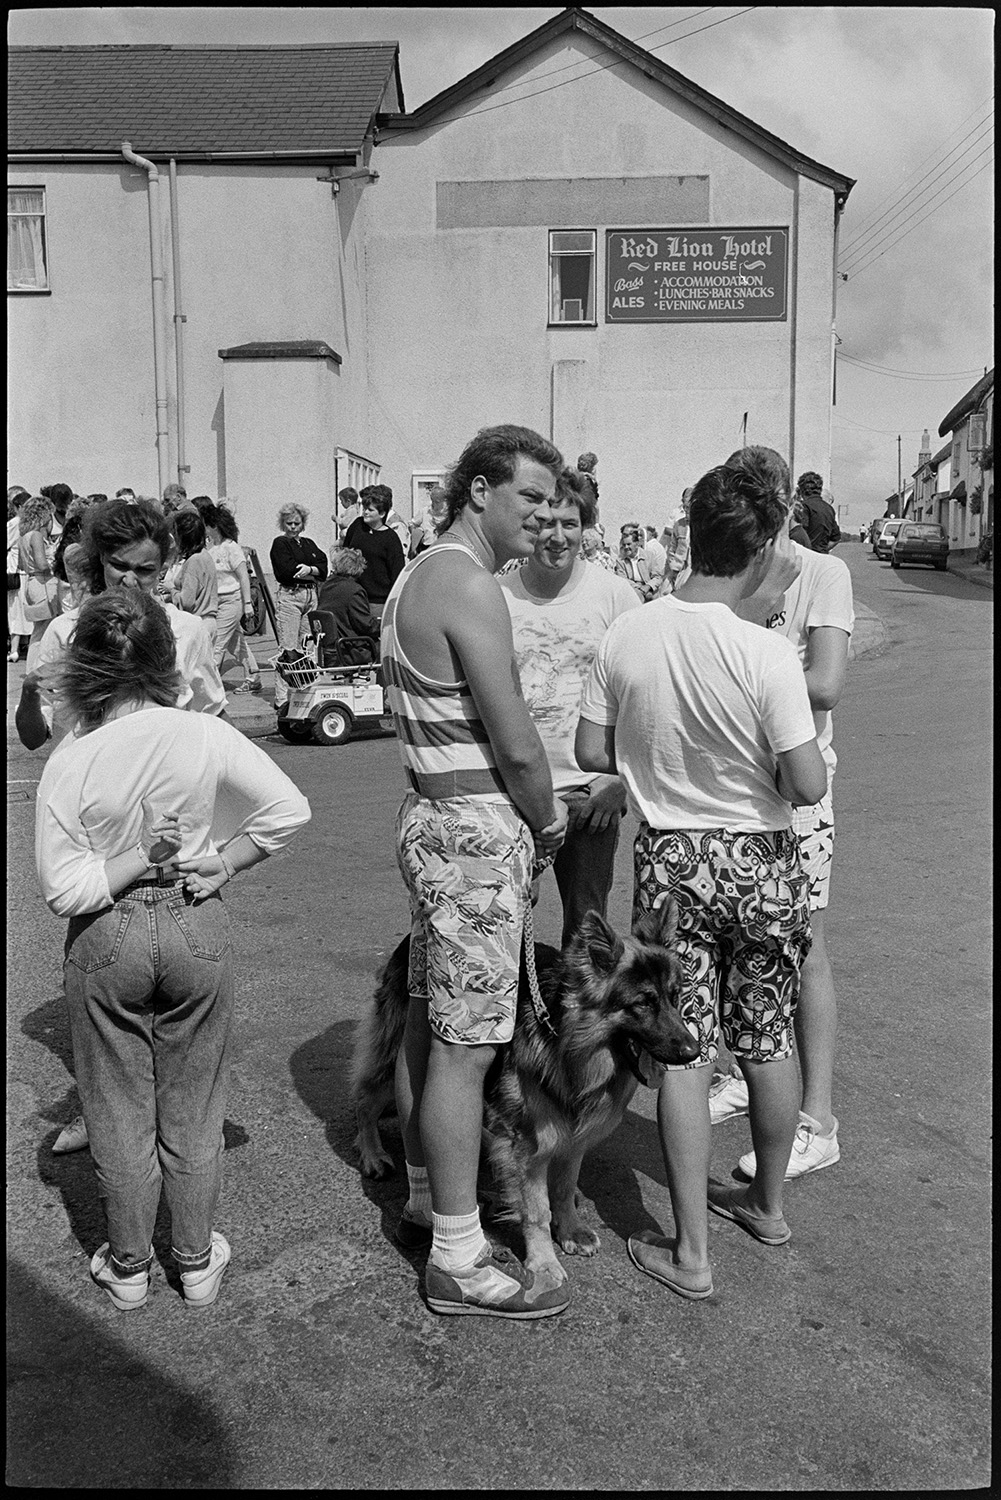 Fair, display of flowers and produce, fancy dress parade in street. 
[Men and women gathered in the street outside the Red Lion Hotel at Chulmleigh Fair. A man is holding the lead of a German Shepherd dog in the foreground. Some of the young men are wearing patterned shorts.]